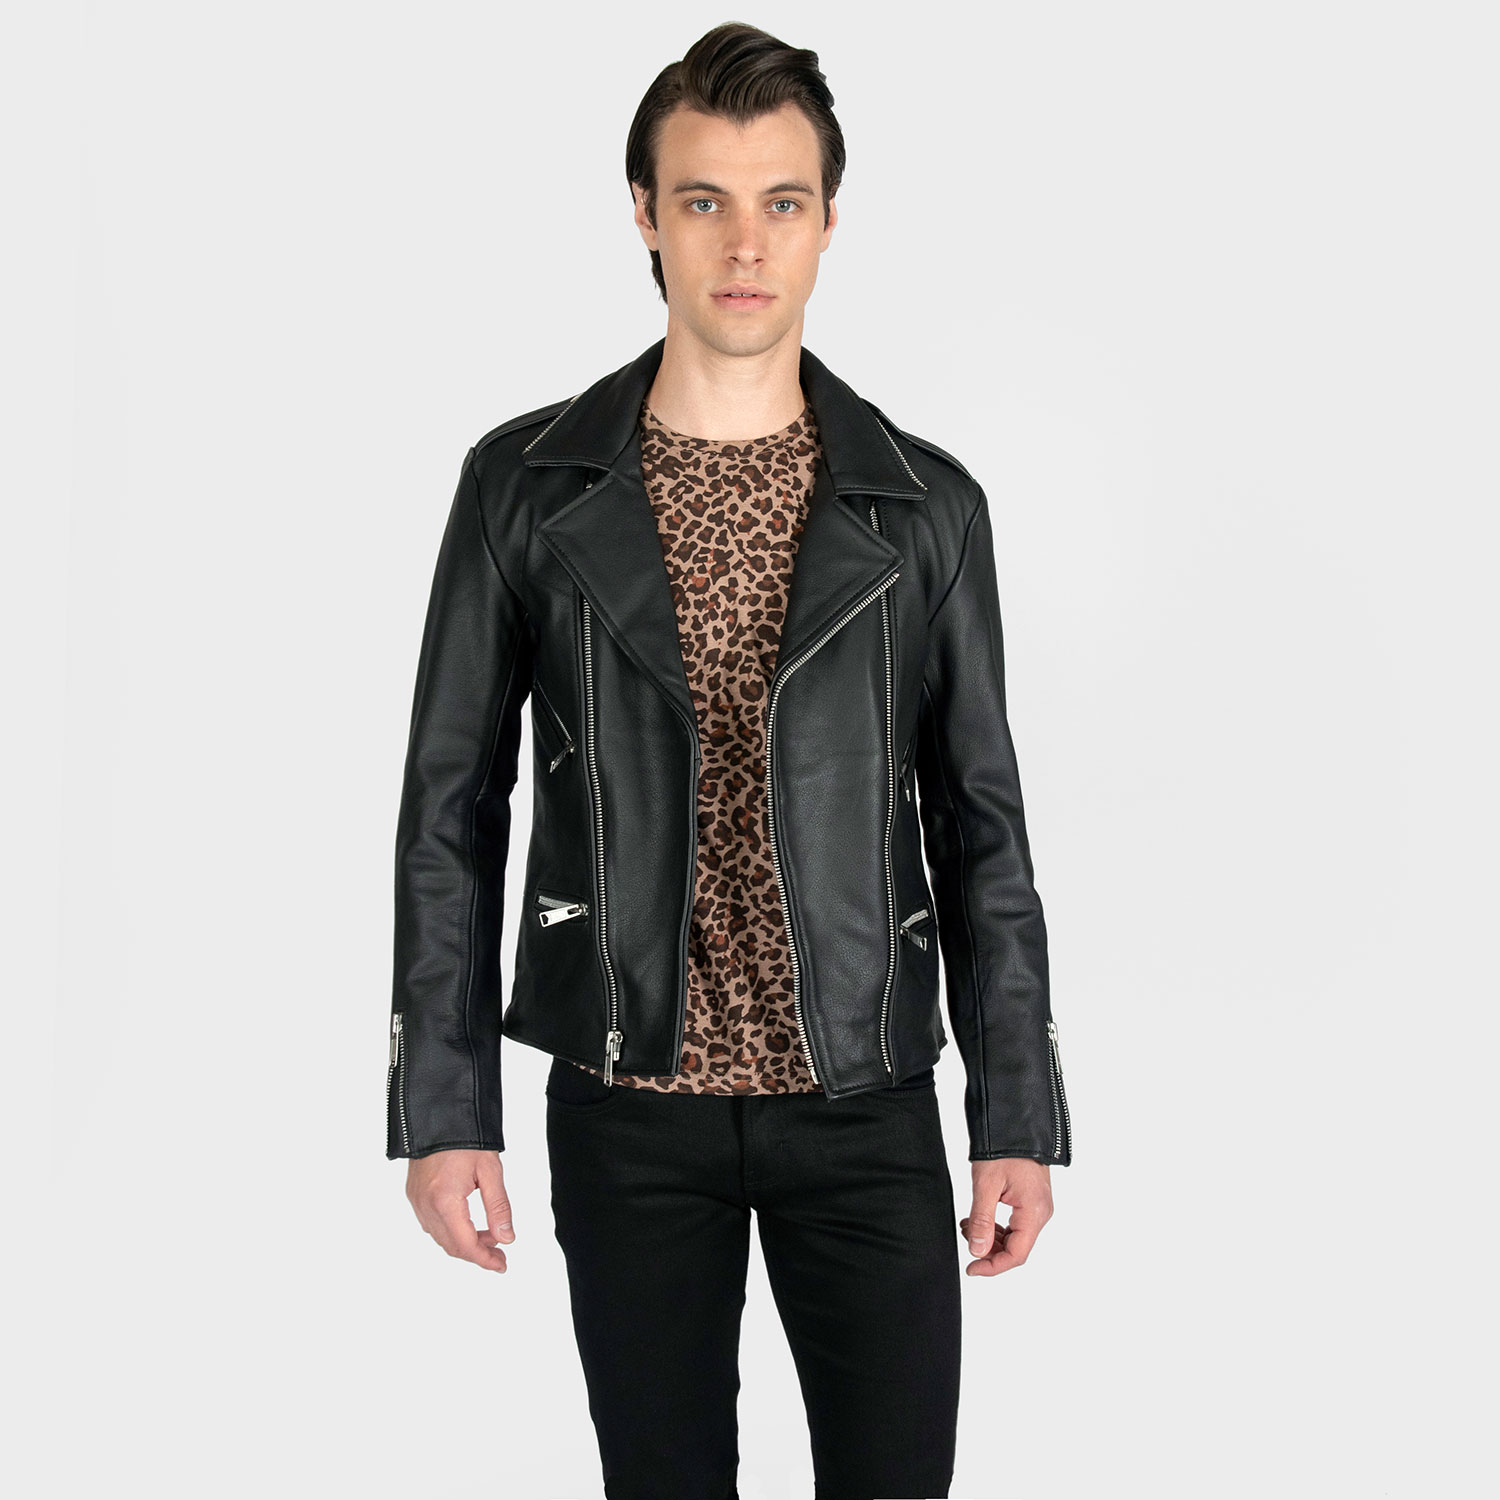 Avenue - Leather Jacket - Men's by Straight to Hell